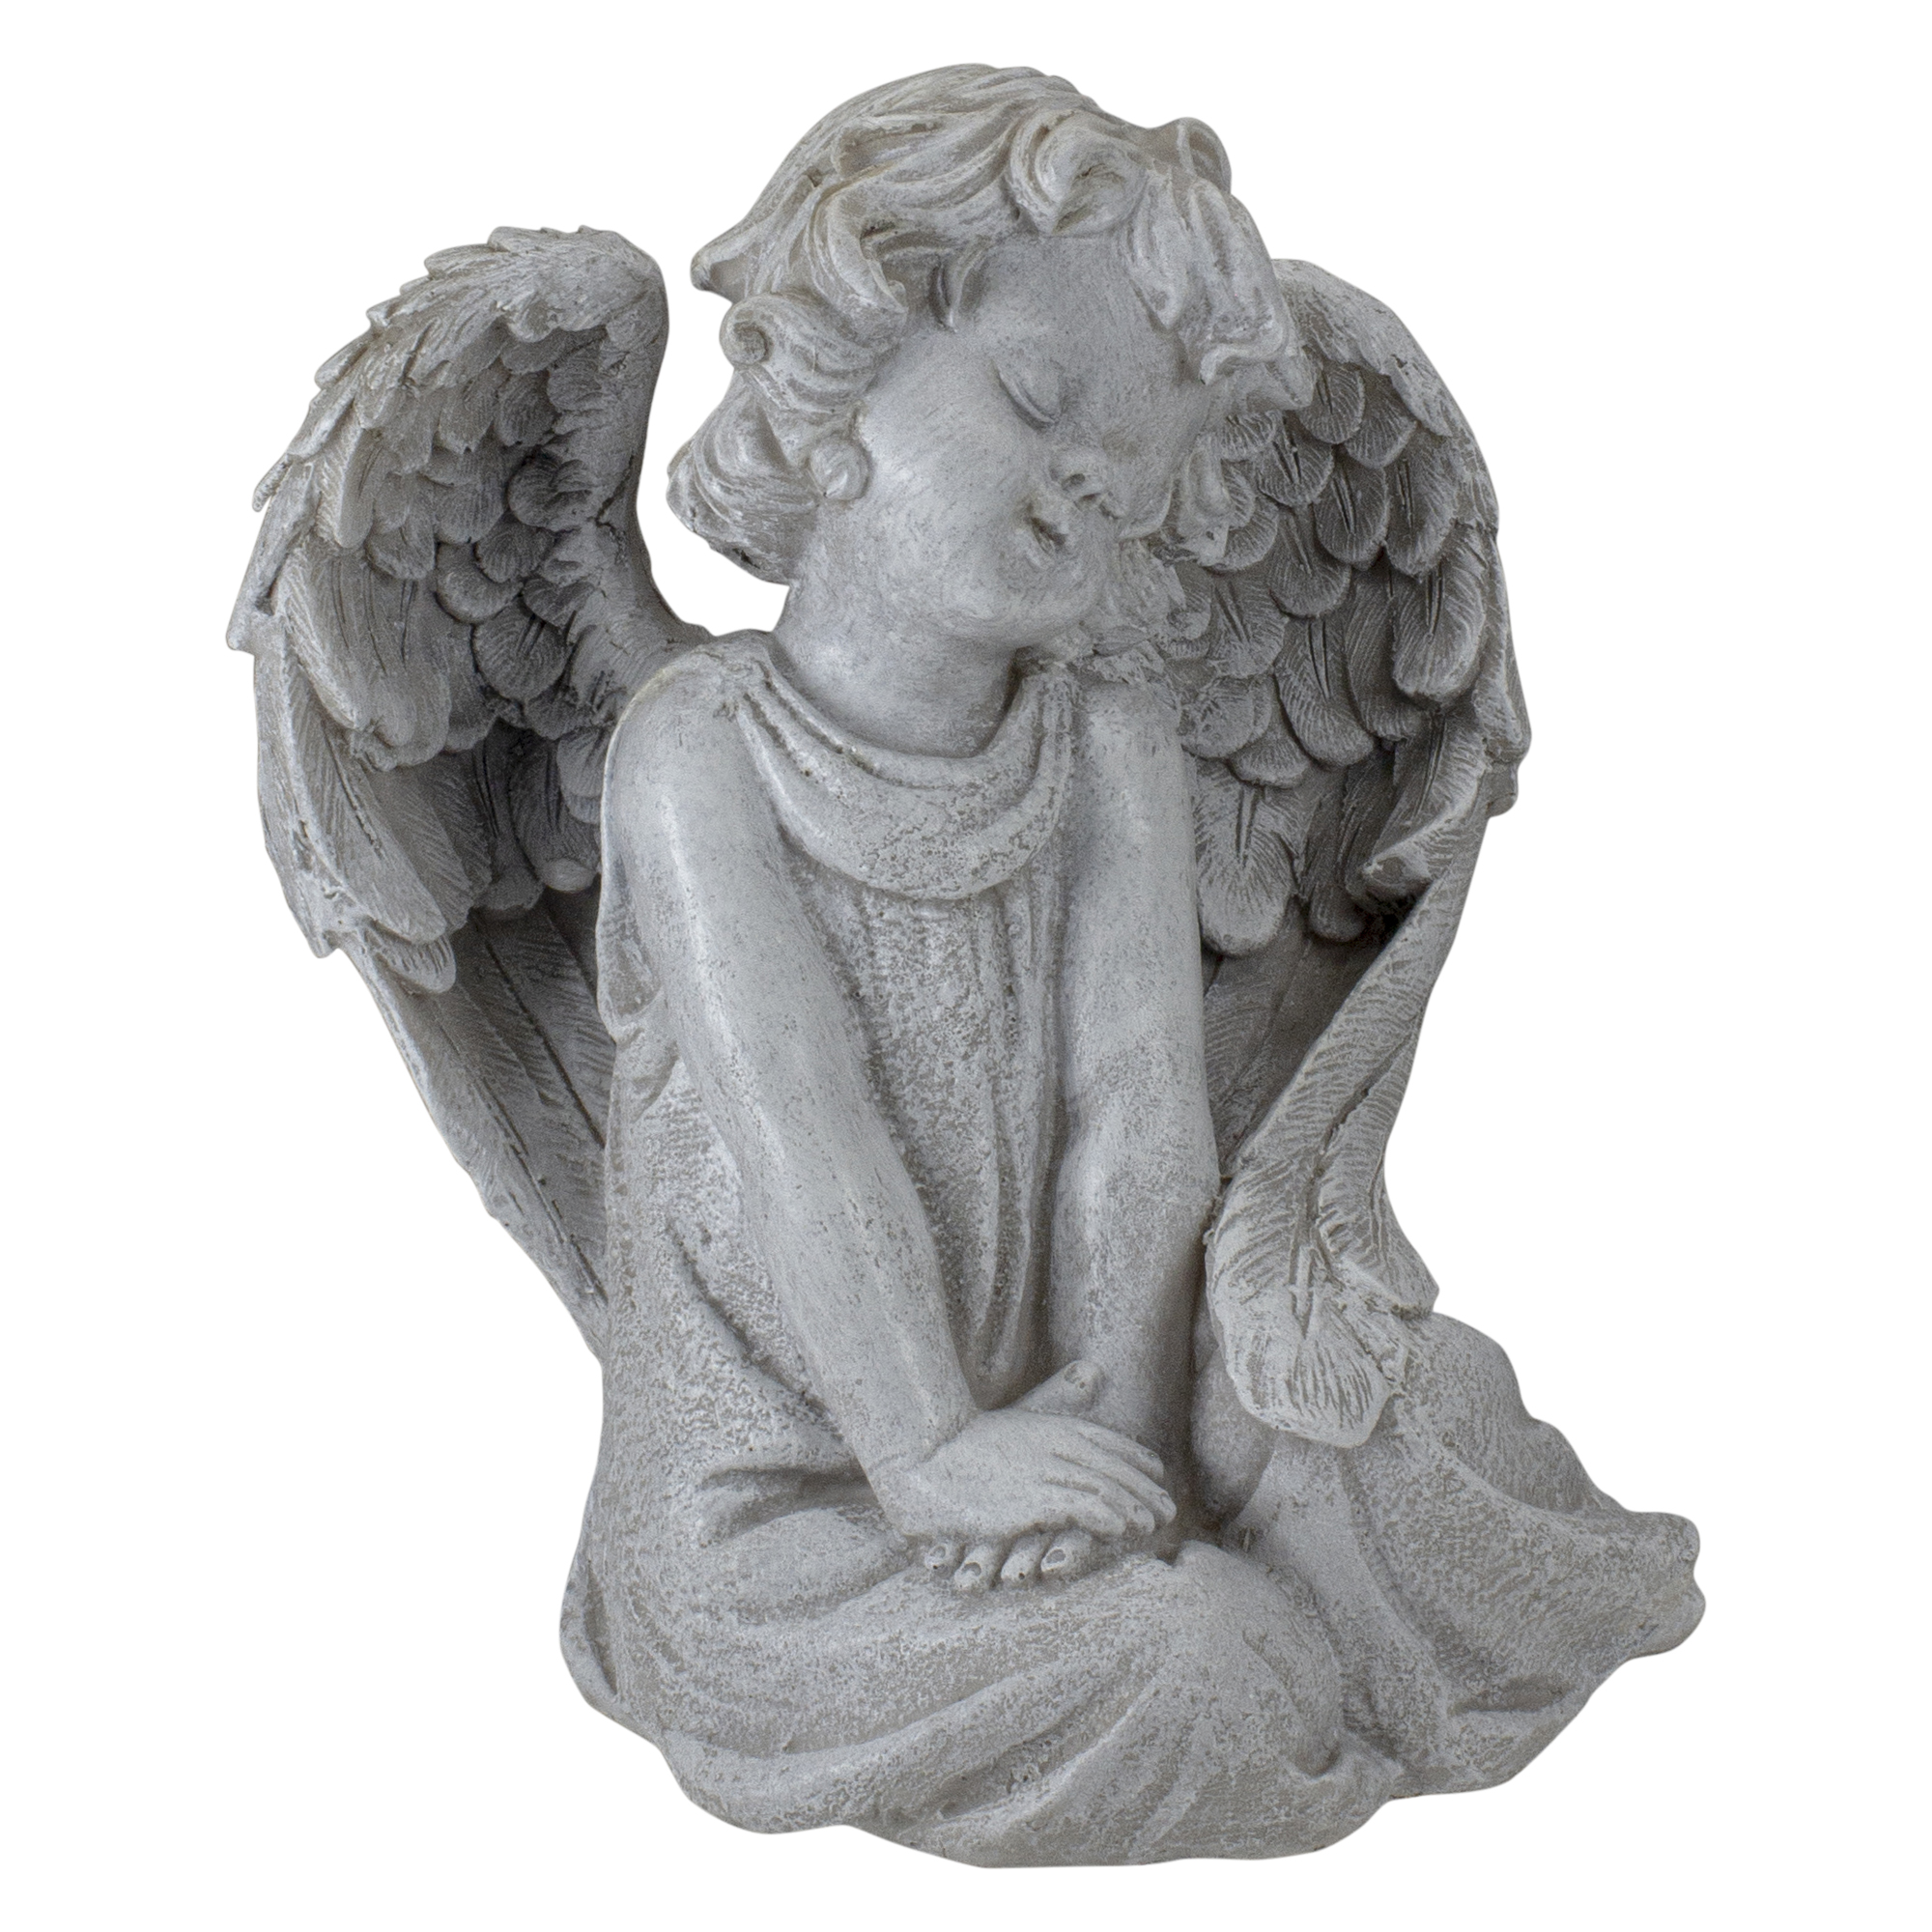 Northlight 8.75" Gray Sitting  Angel with Wings Outdoor Garden Statue - image 3 of 5